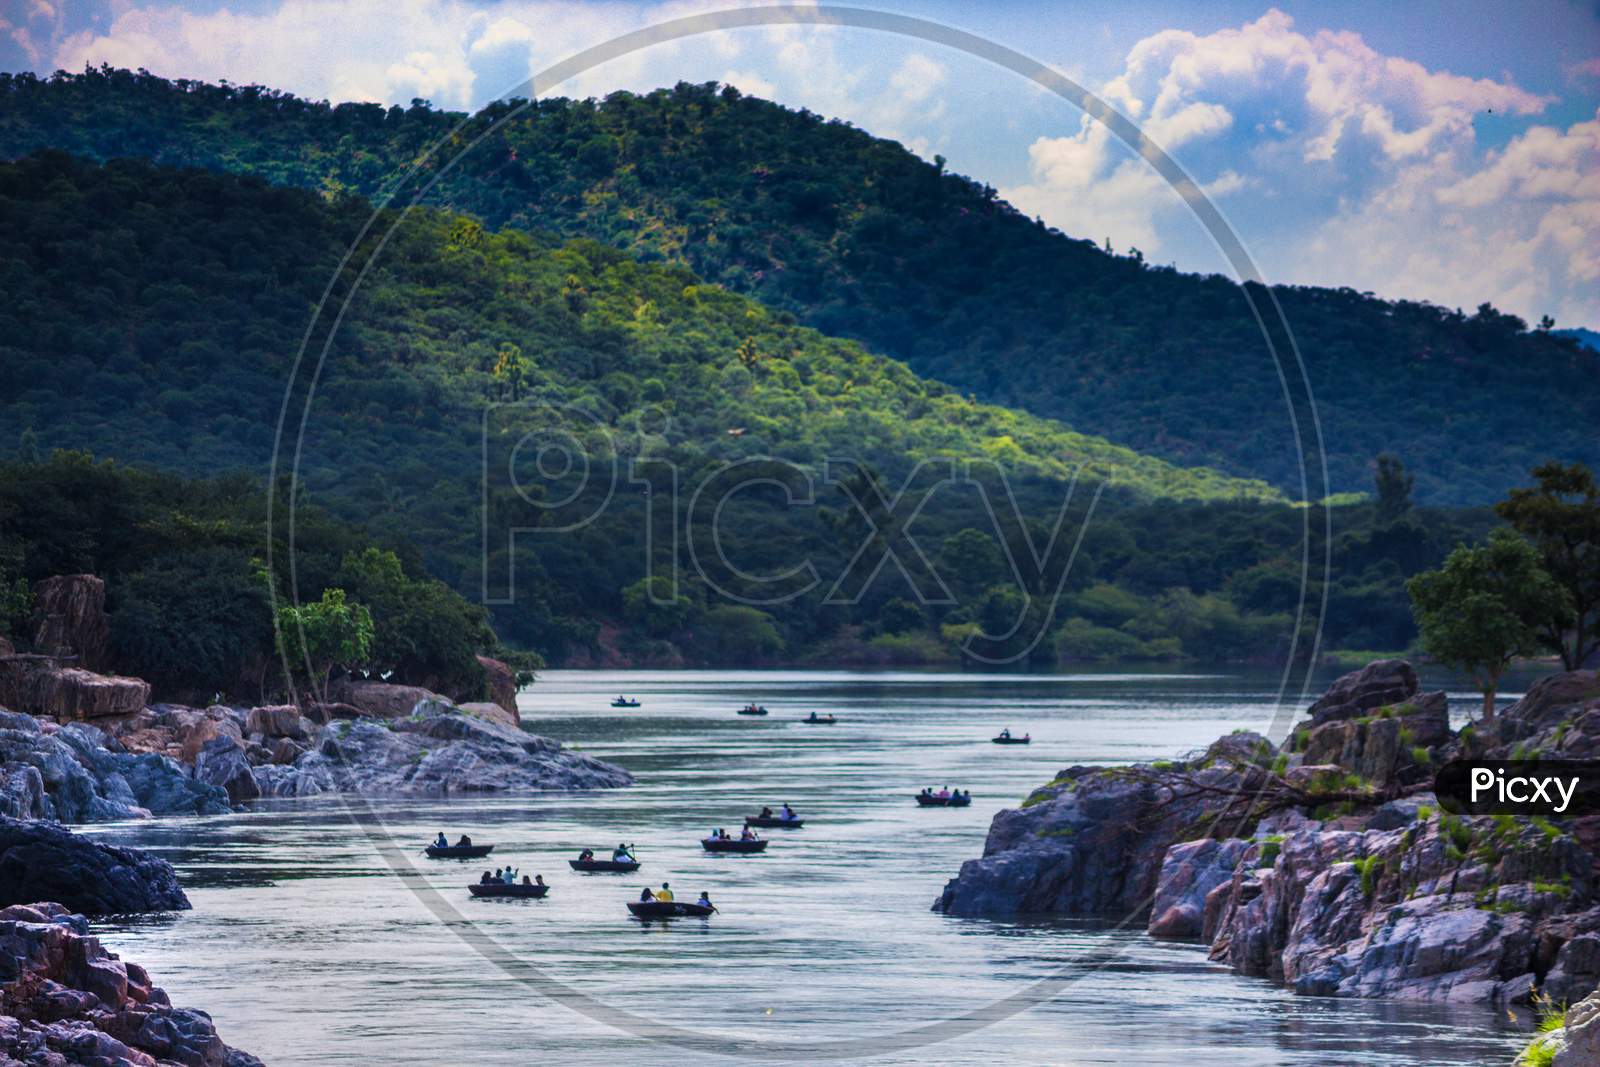 View of Hills and the Boat ride at Hogenakkal Water falls